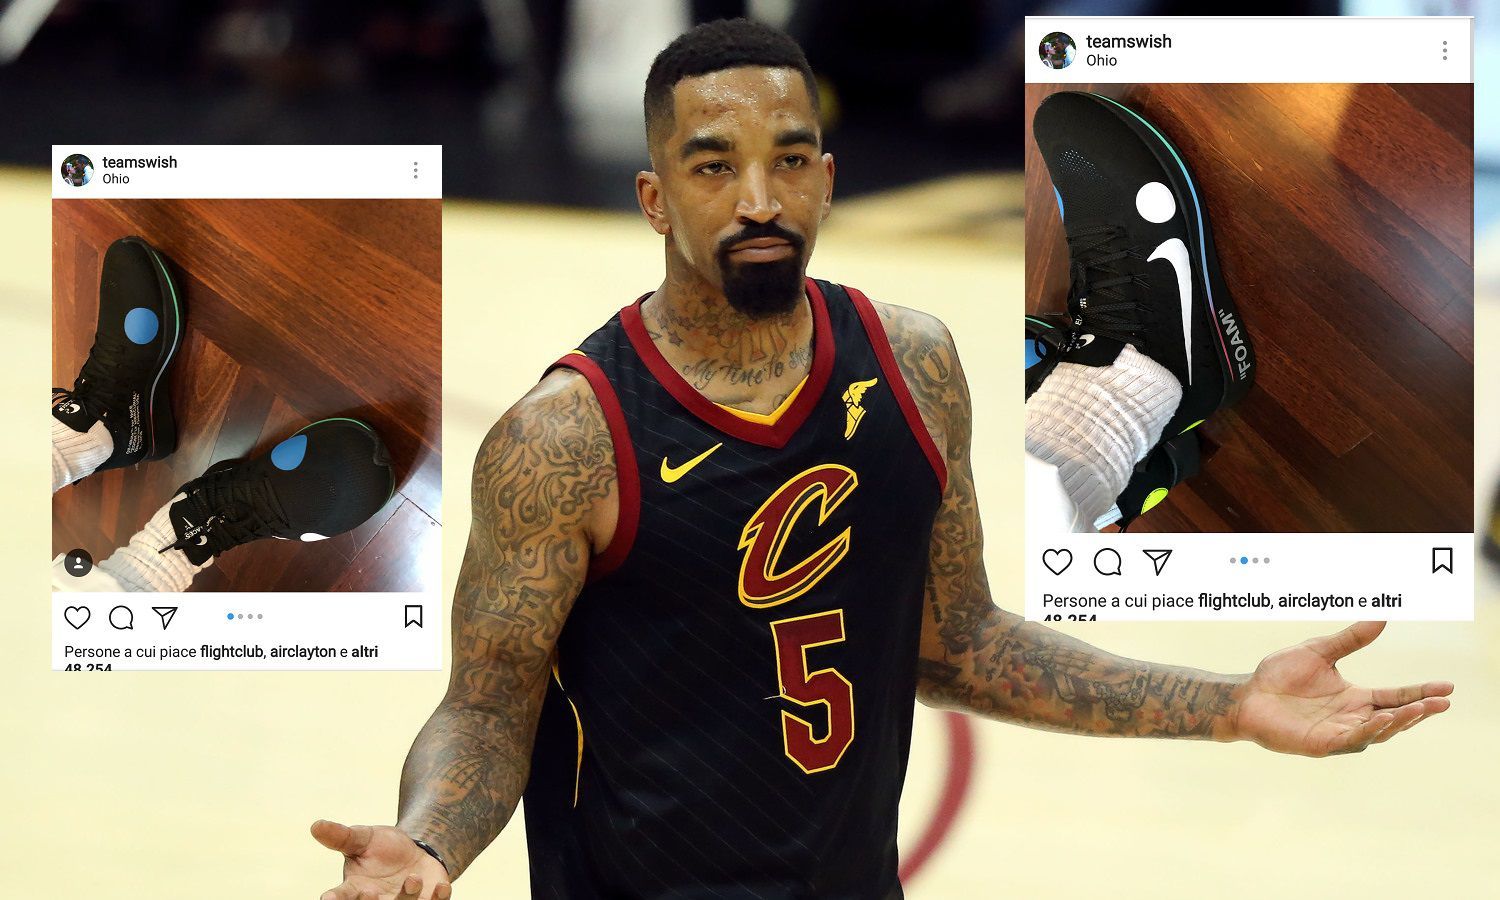 J.R played with the Off-White Nike Zoom Fly Mercurial Flyknit